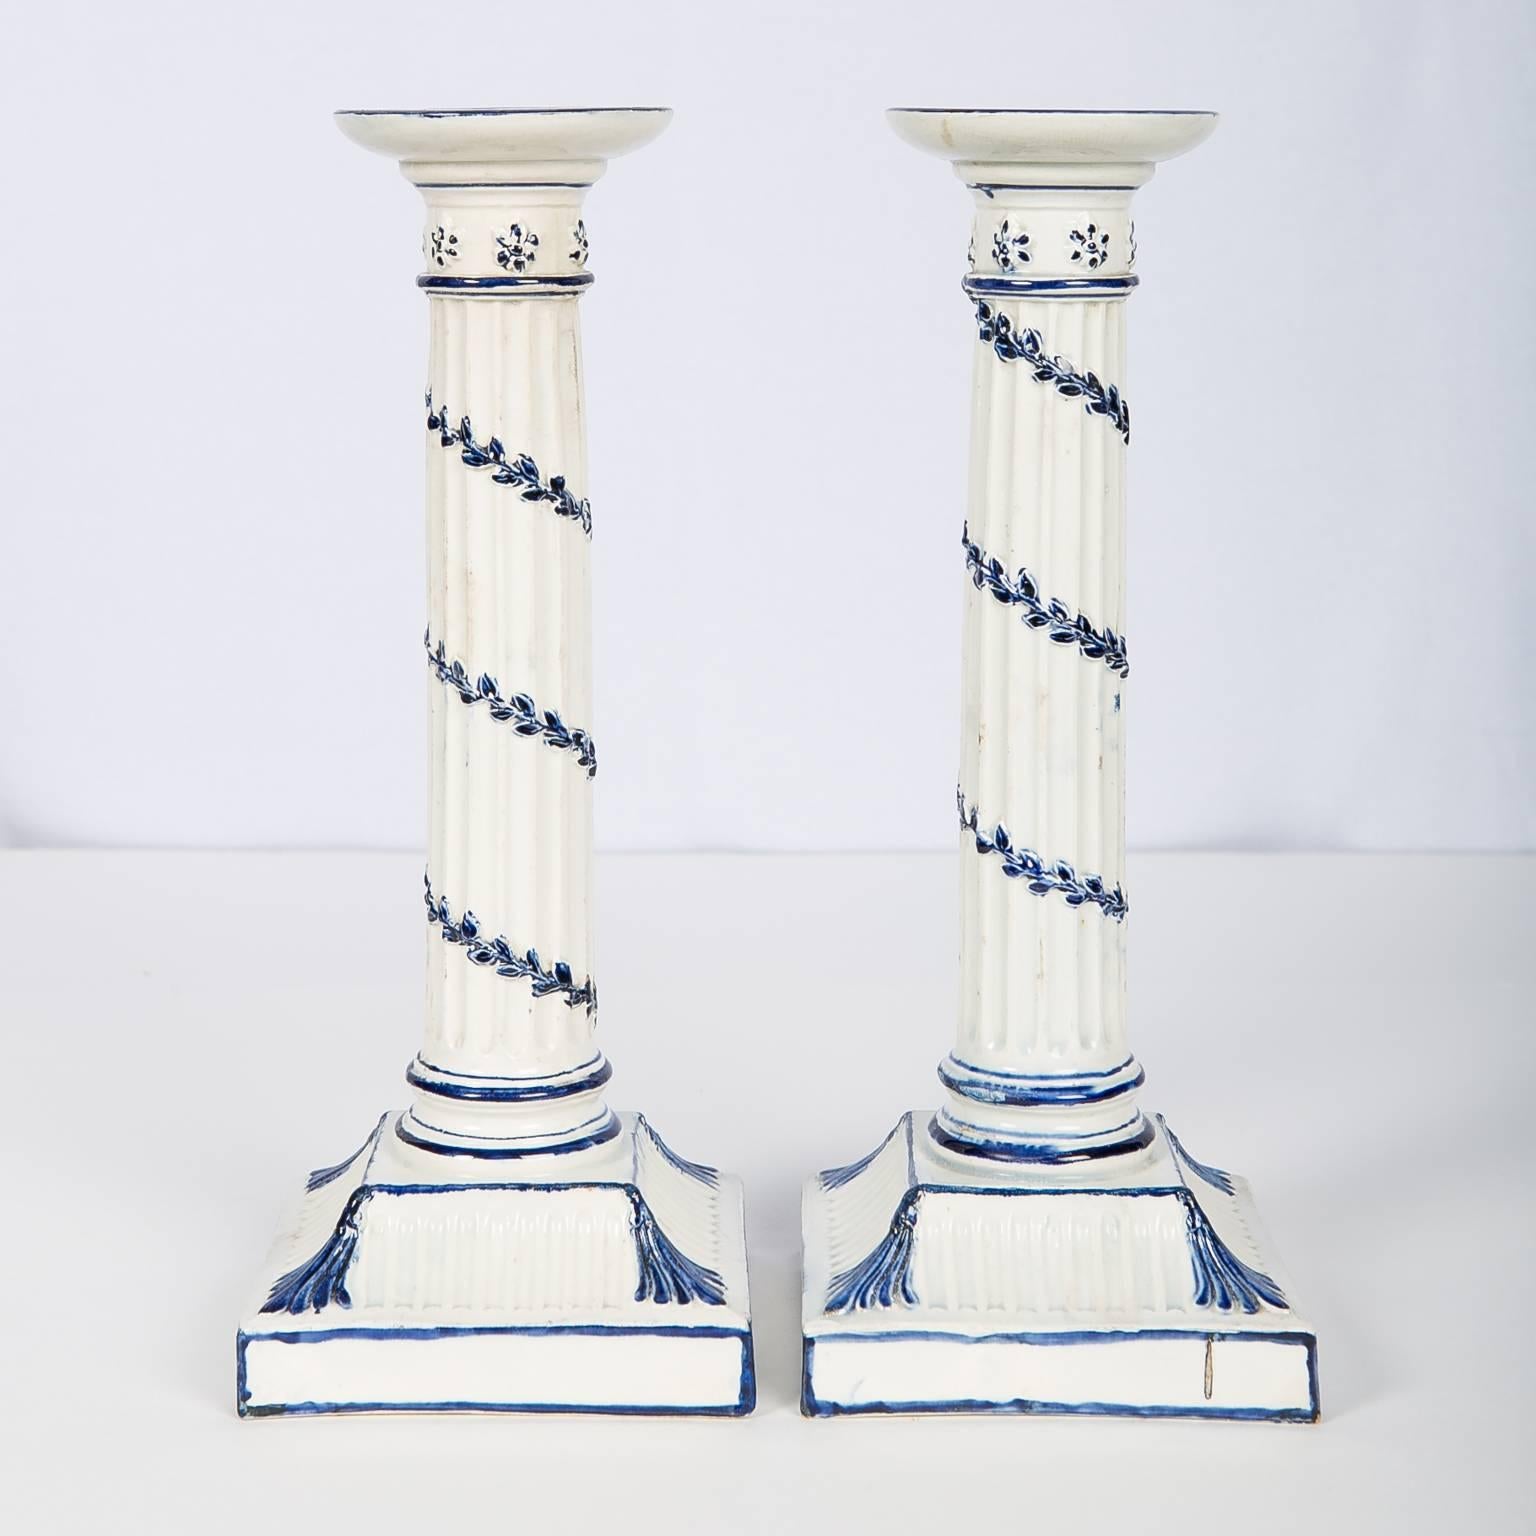 Early 19th Century Wedgwood Blue and White Candlesticks with Neoclassical Design